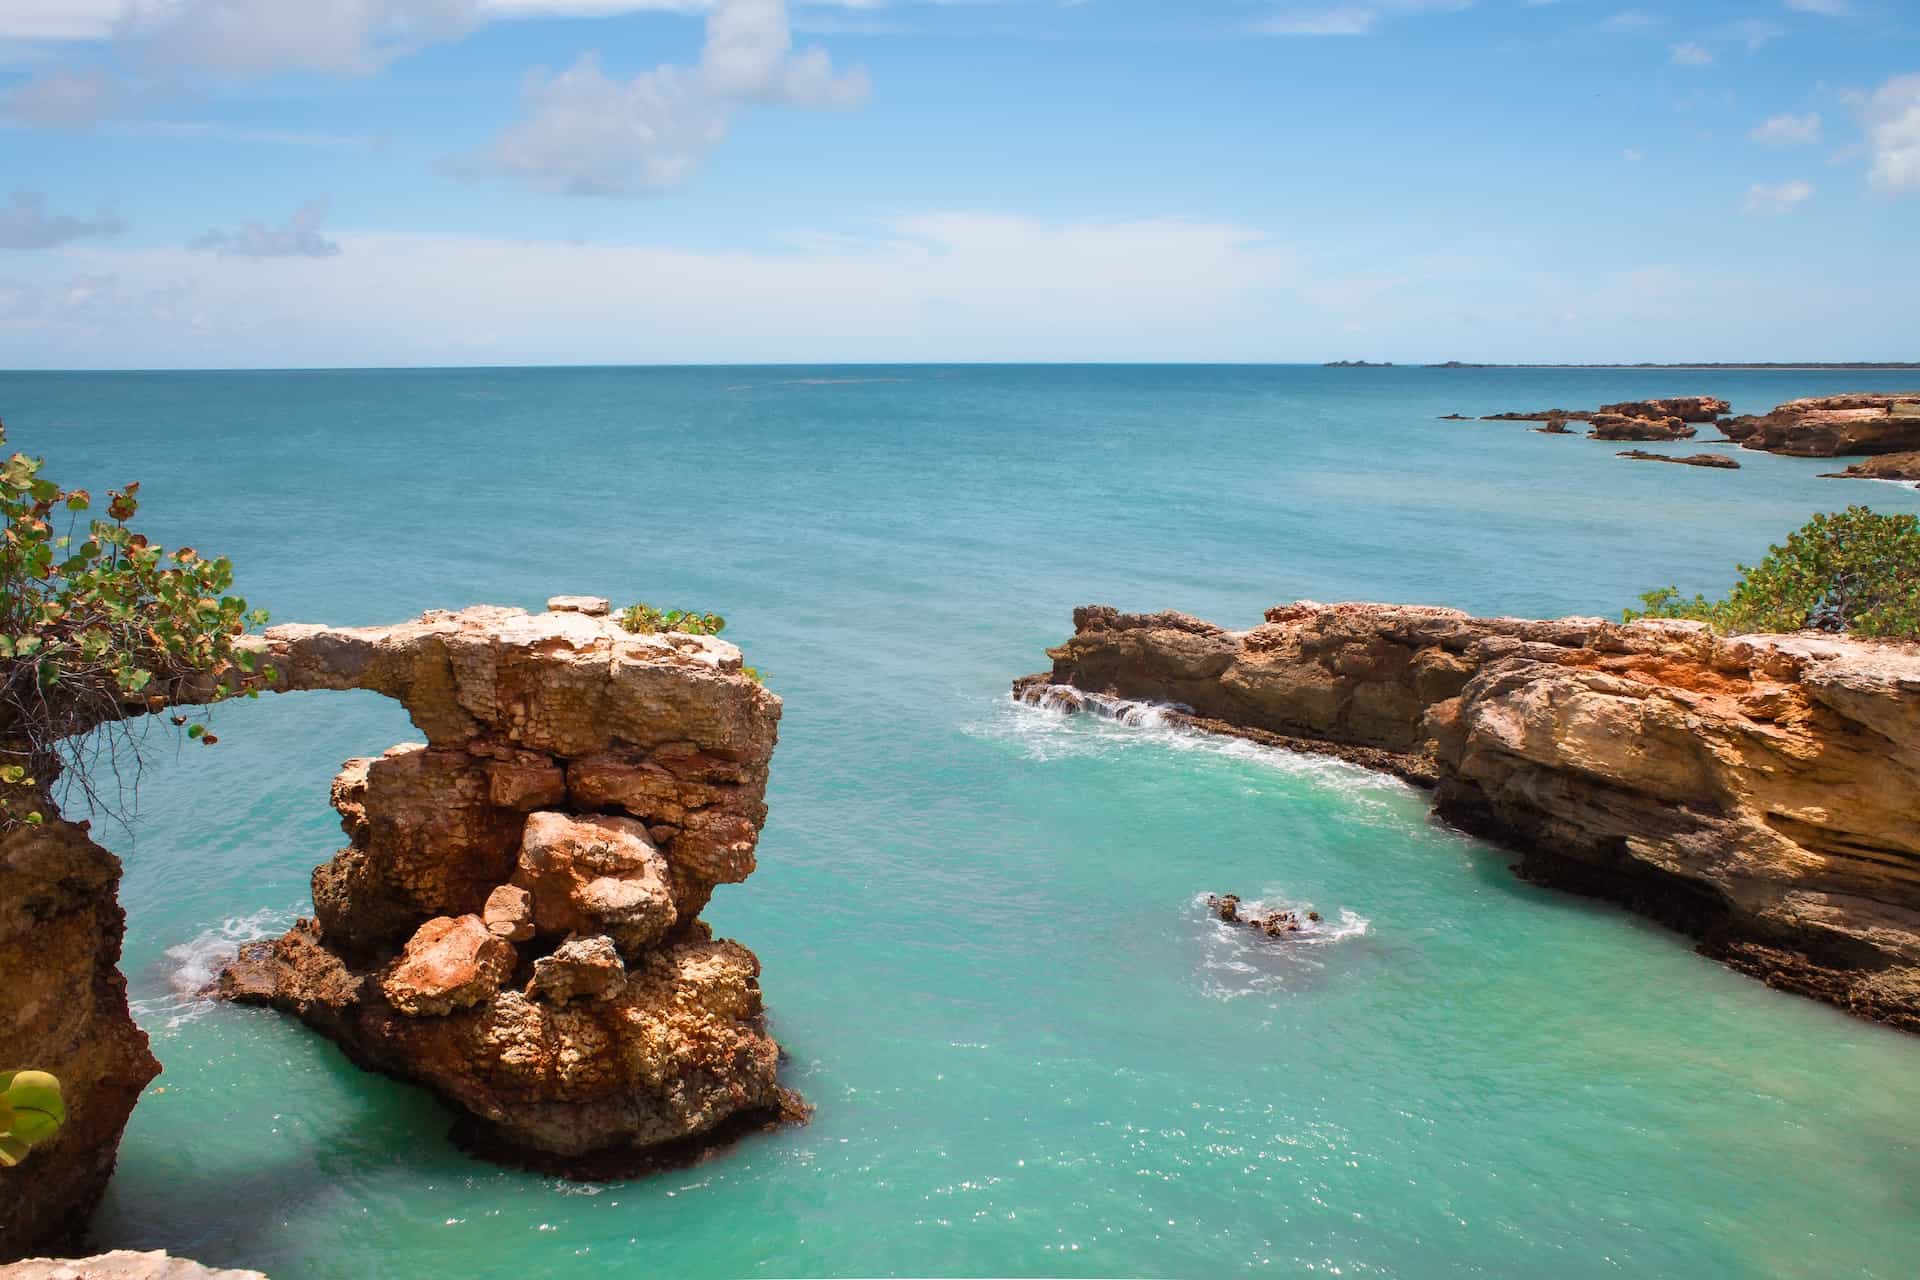 A formation of rocks and cliffs over bright blue water on Puerto Rico’s shore.